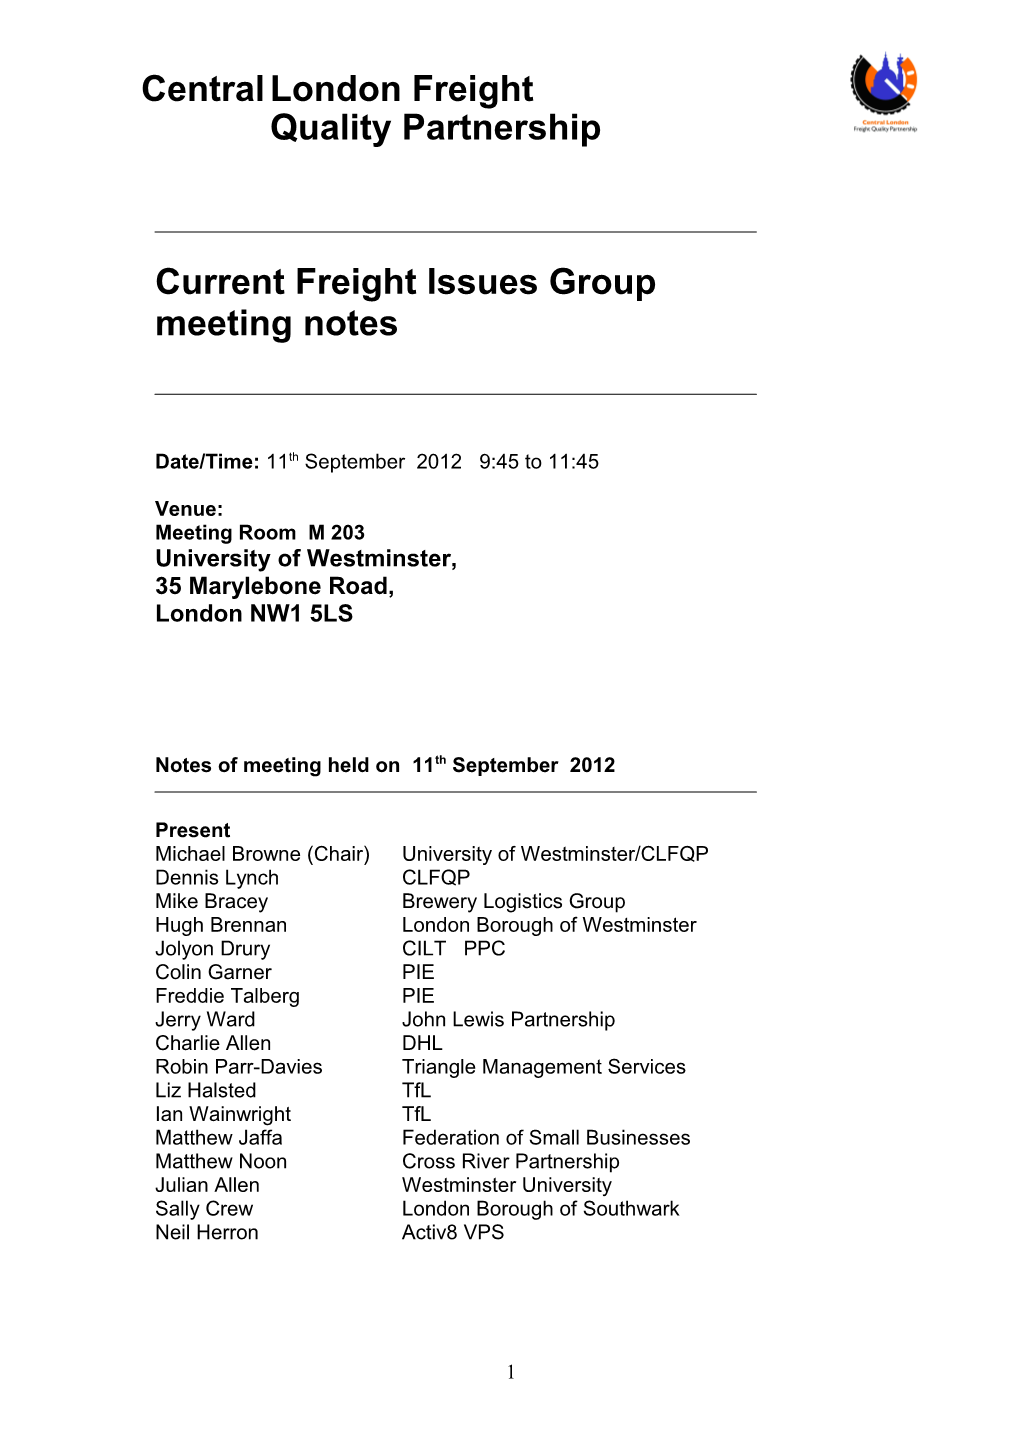 Current Freight Issues Group